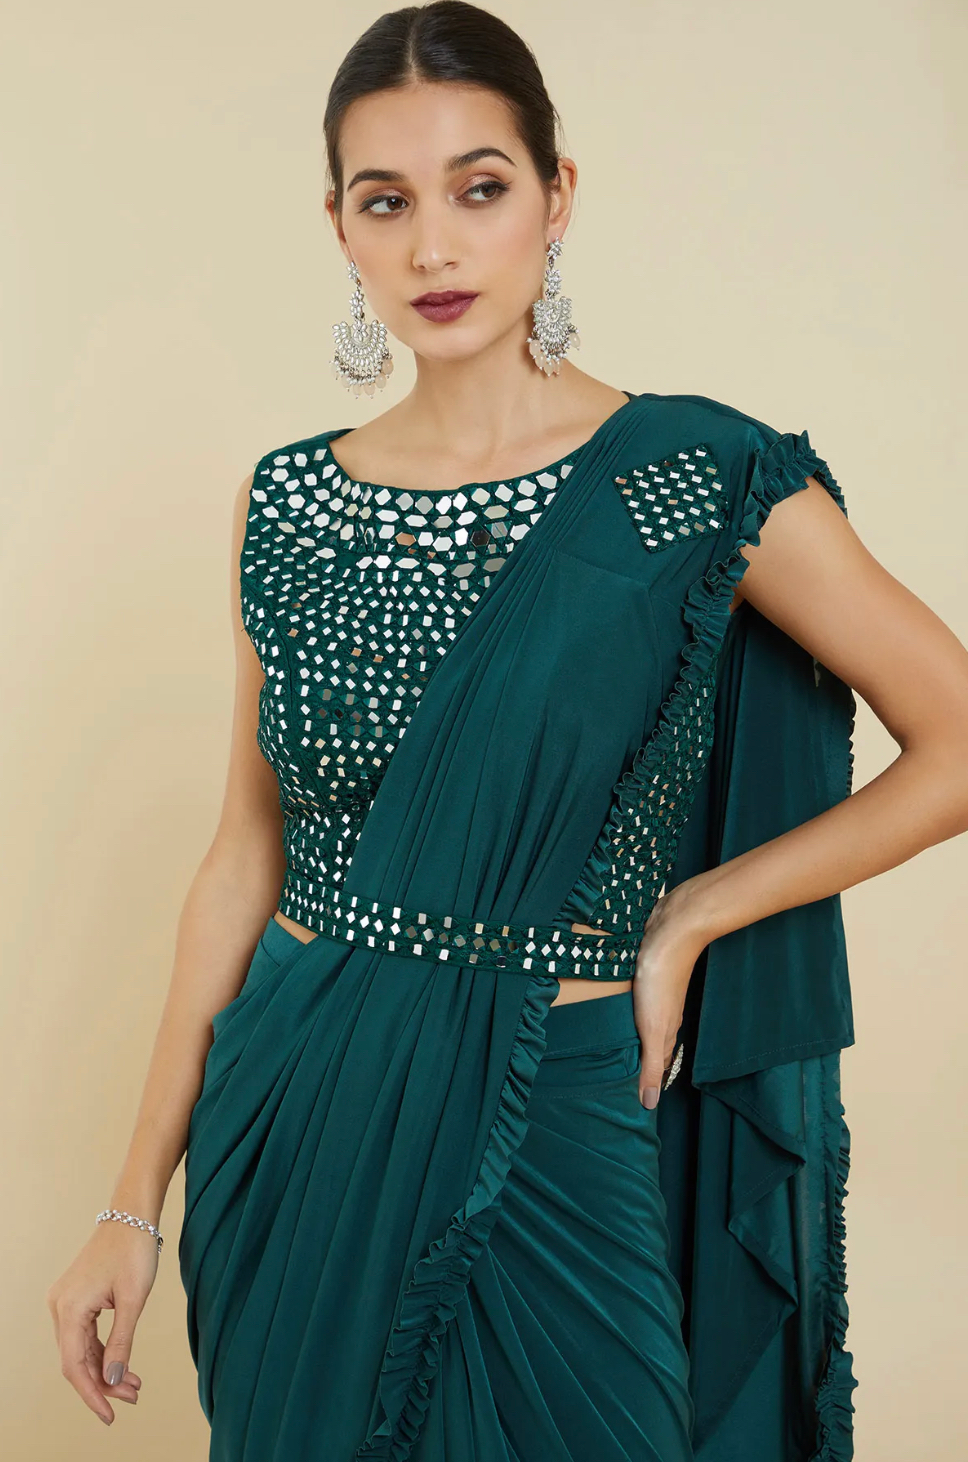 Premium imported fabric ready to wear saree IF - Green